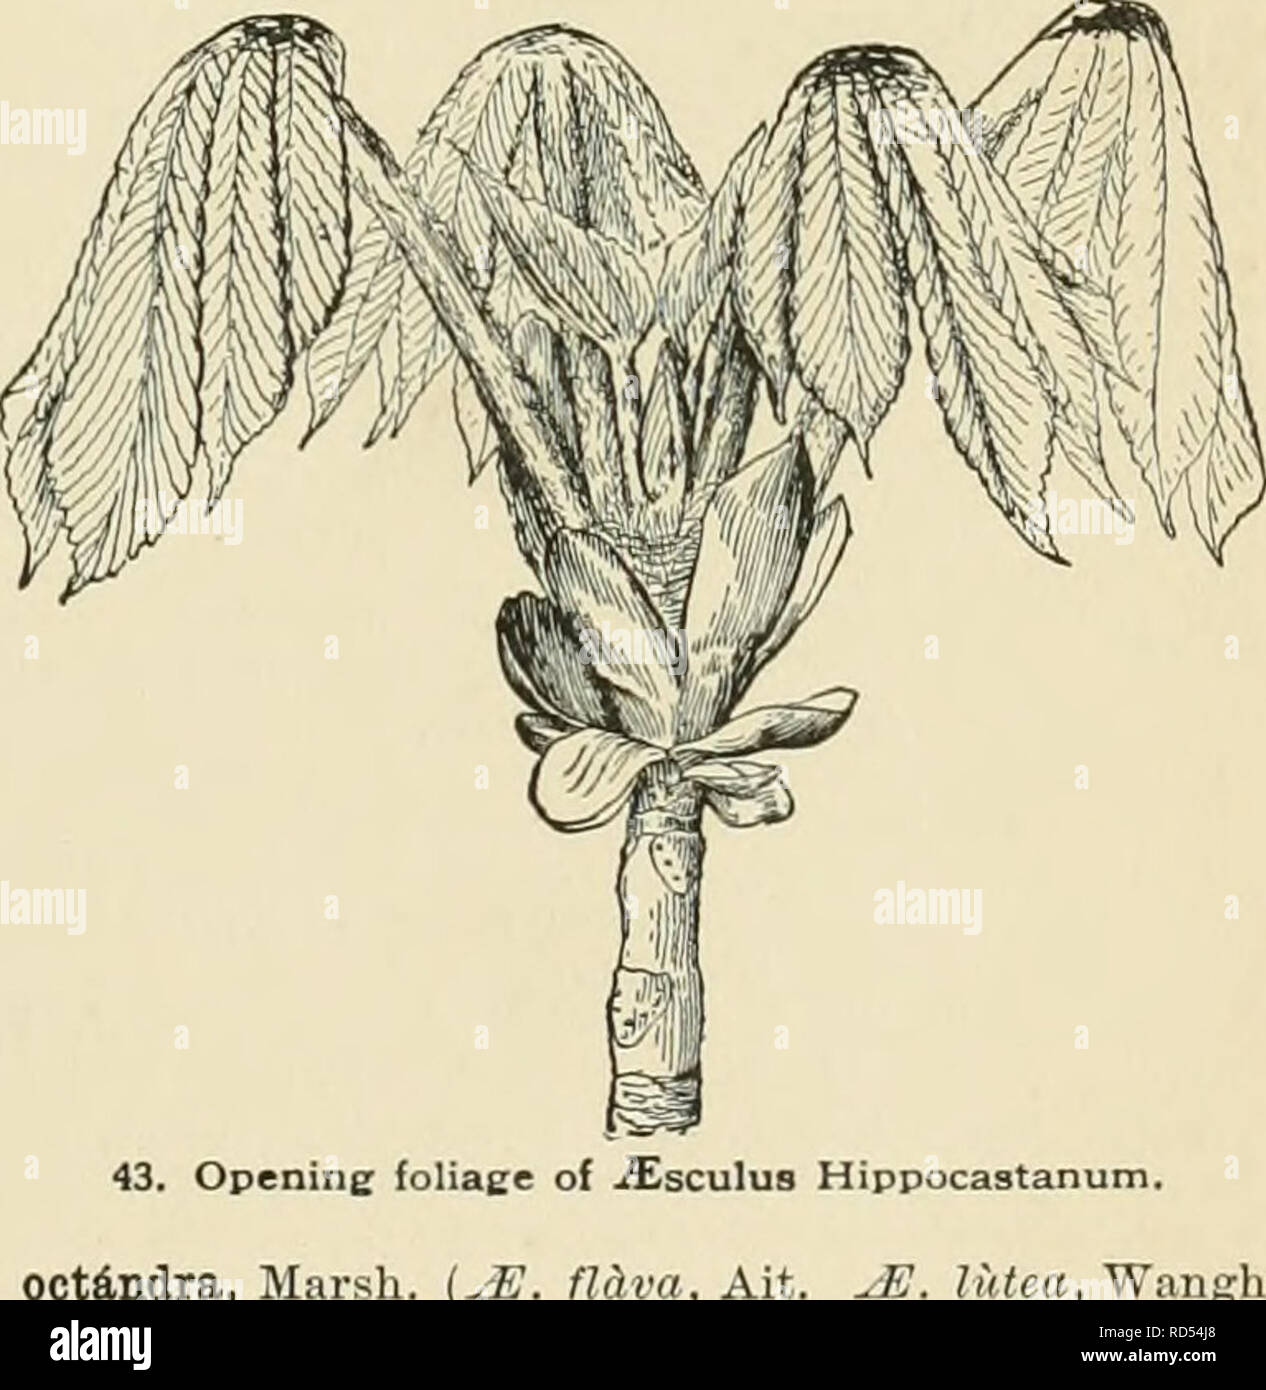 . Cyclopedia of American horticulture, comprising suggestions for cultivation of horticultural plants, descriptions of the species of fruits, vegetables, flowers, and ornamental plants sold in the United States and Canada, together with geographical and biographical sketches. Gardening. 42. -Xschynanthus pulchra. calyx and corolla. B.M. 4503. F.S. 6:558.â^. iompdngo. Miq. Lvs. ovate or elliptic, obtusish, entire; calyx cylindrical, gla- brous: corolla twice as long (2 in.), pubescent, scarlet. Sumatra. P.M. 13:175.â^.Ion9trt6ra,Blume. Vigorous: lvs. 3-5 in. long: calyx deeply cut, the division Stock Photo